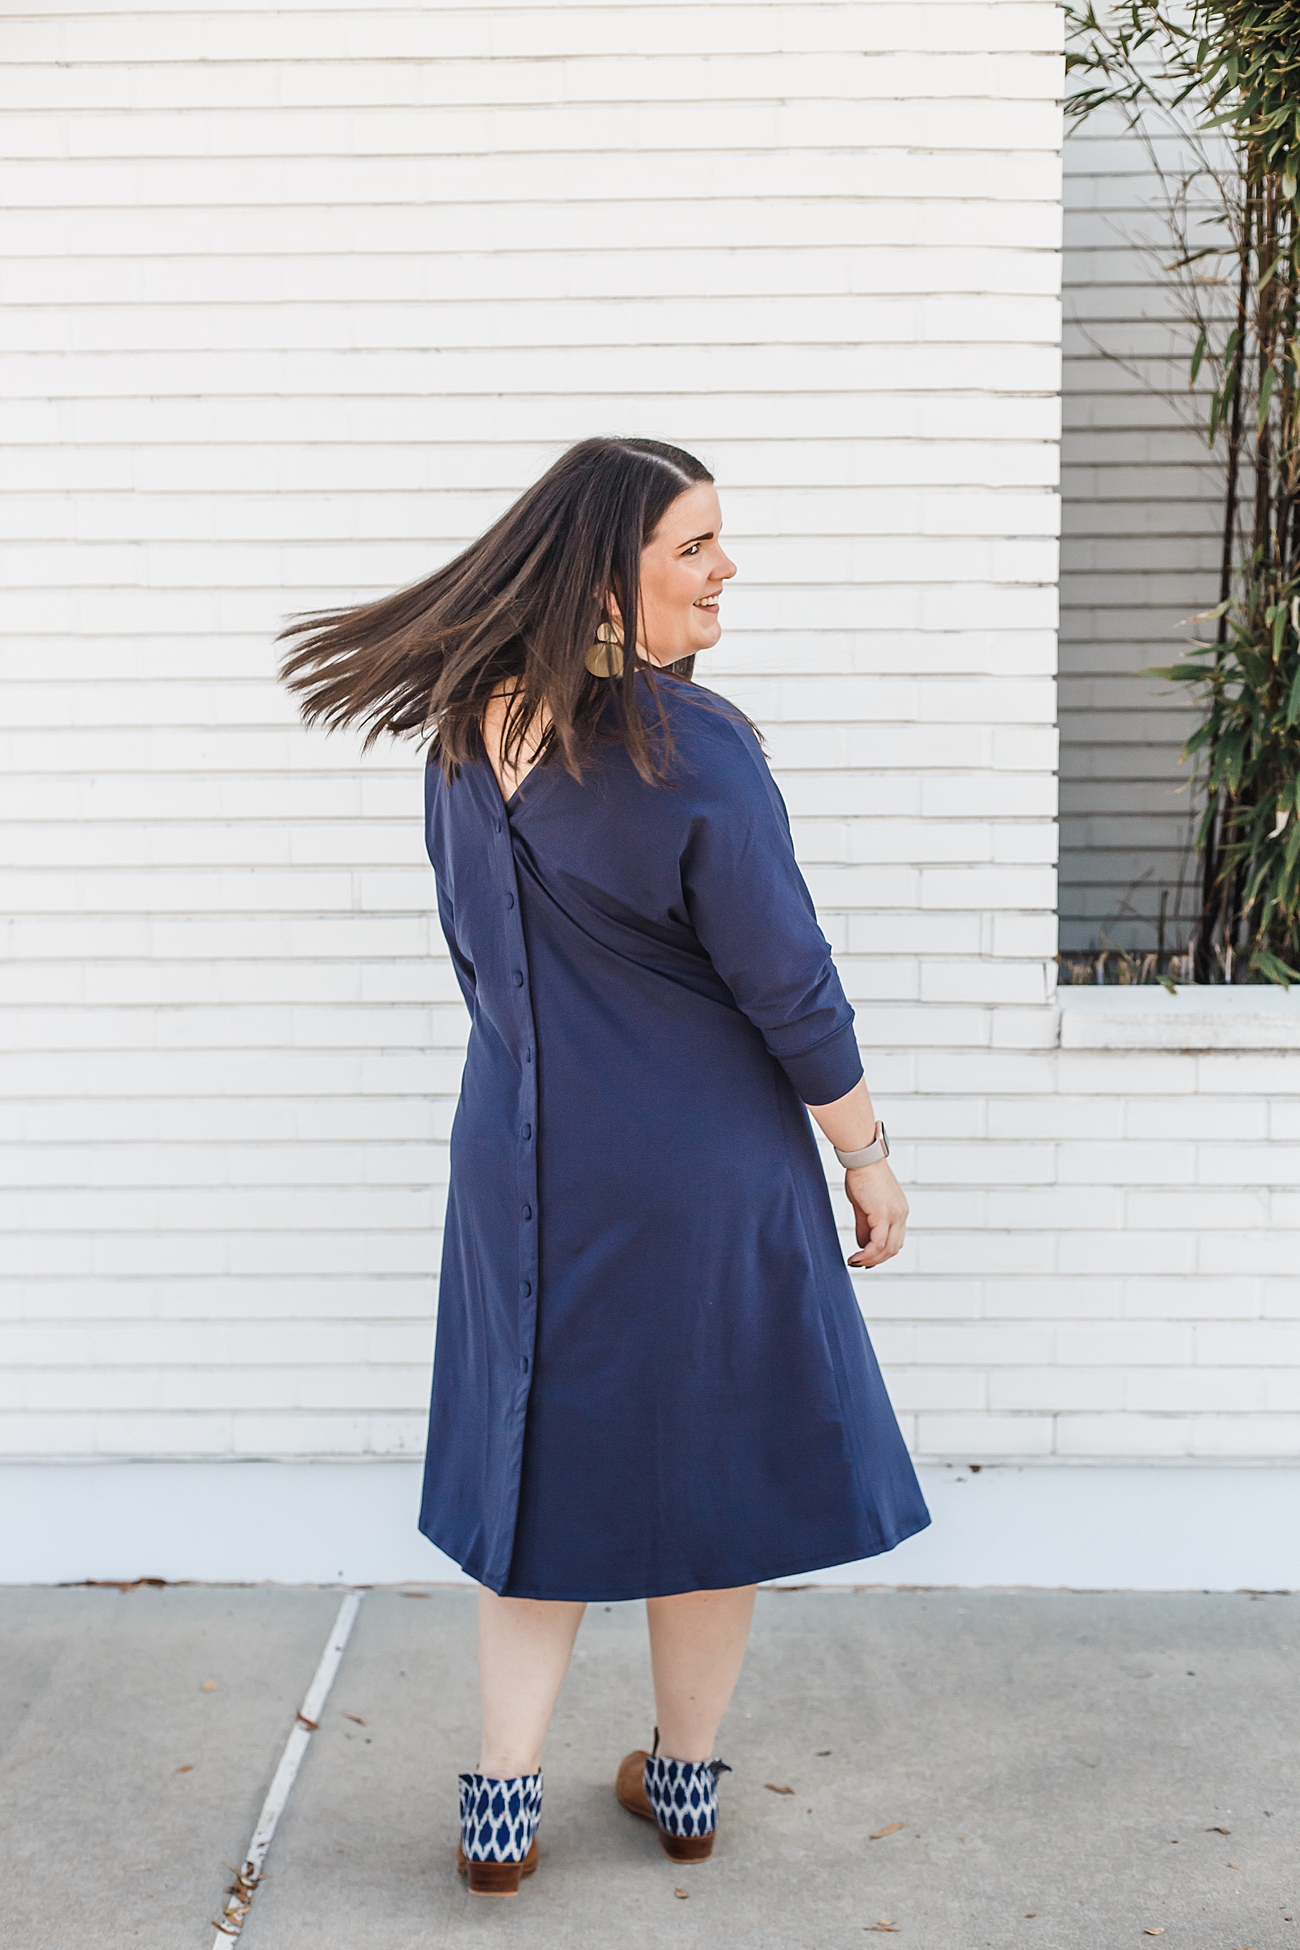 The Elegantees "Molly" Dress is Here! | Beautiful, versatile, ethically made dress (50)